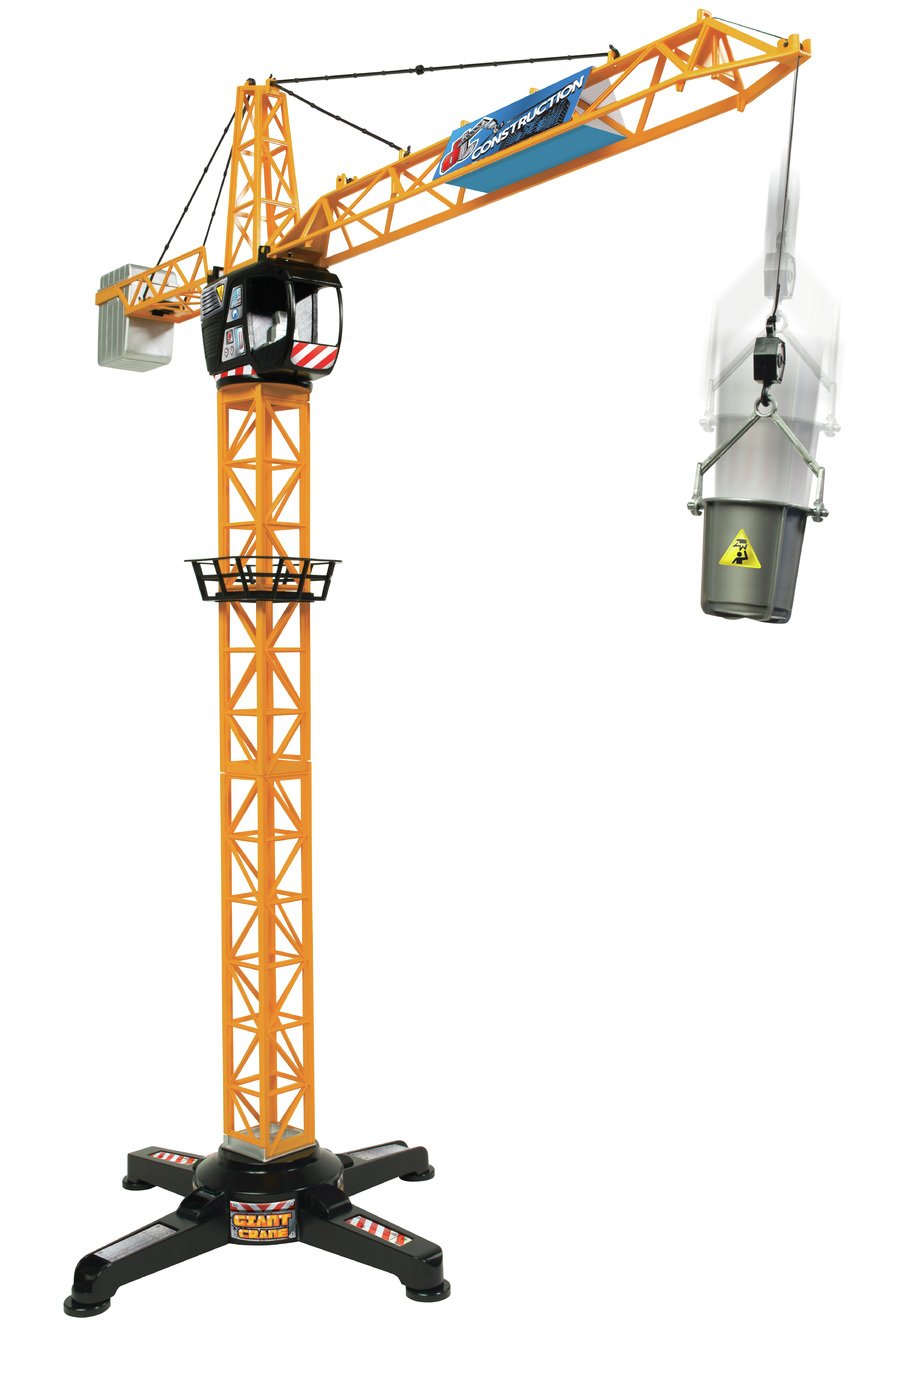 toy crane for 4 year old